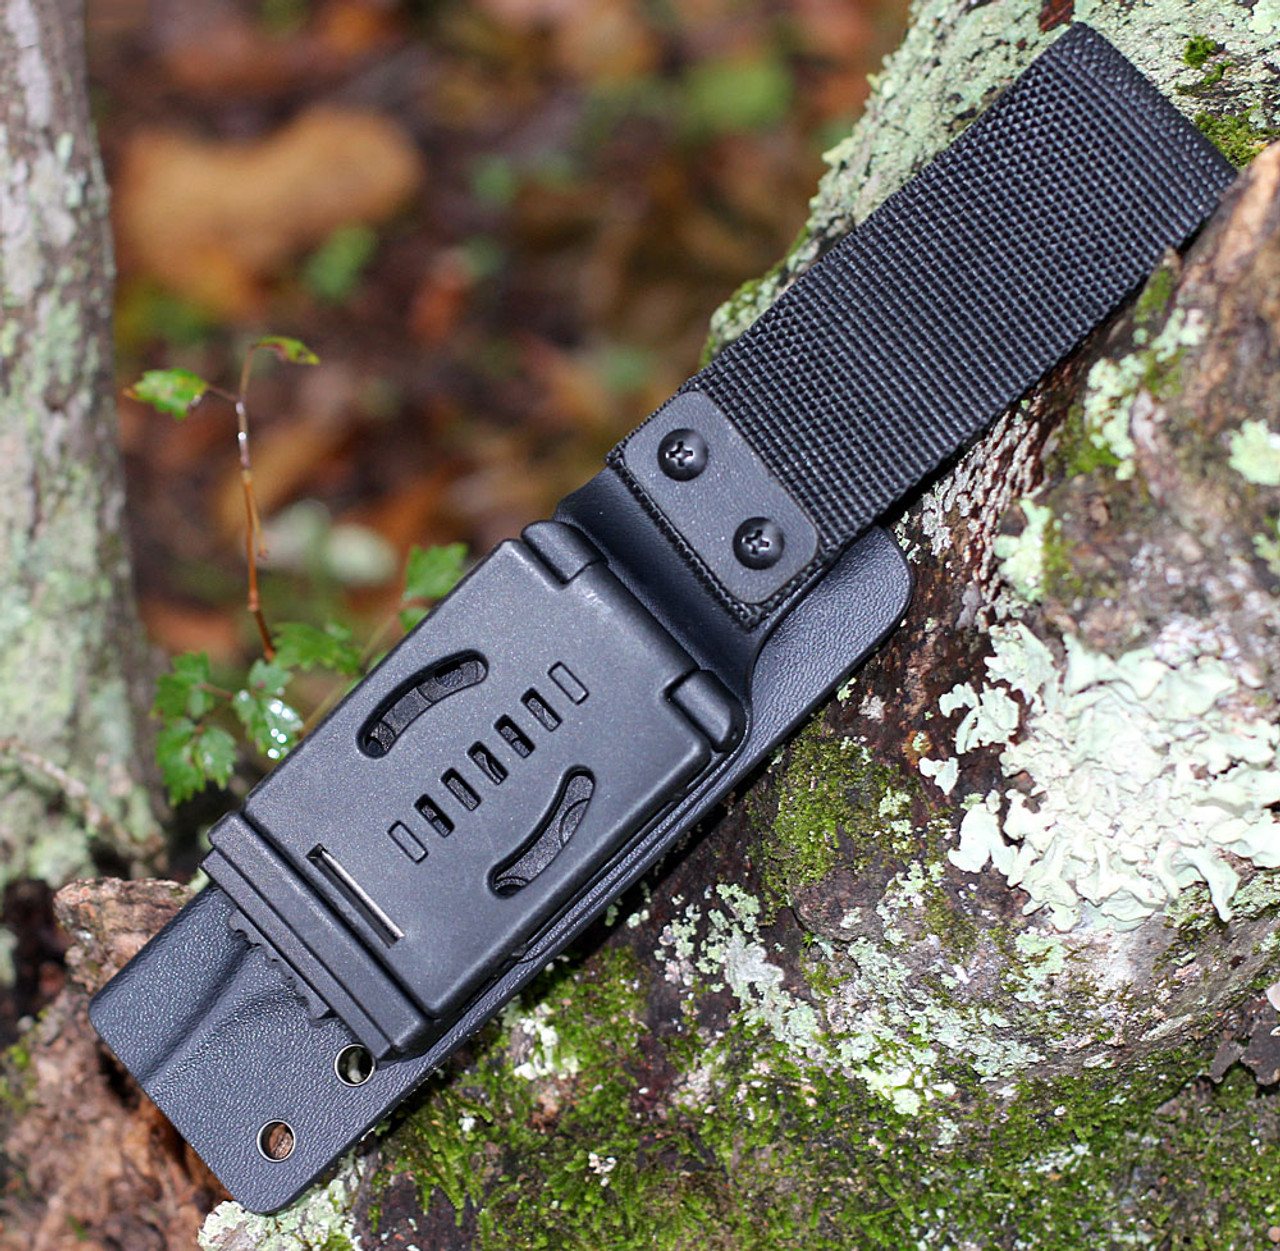 KYDEX sheath for the Cold Steel RECON TANTO Knife! Clip on kydex